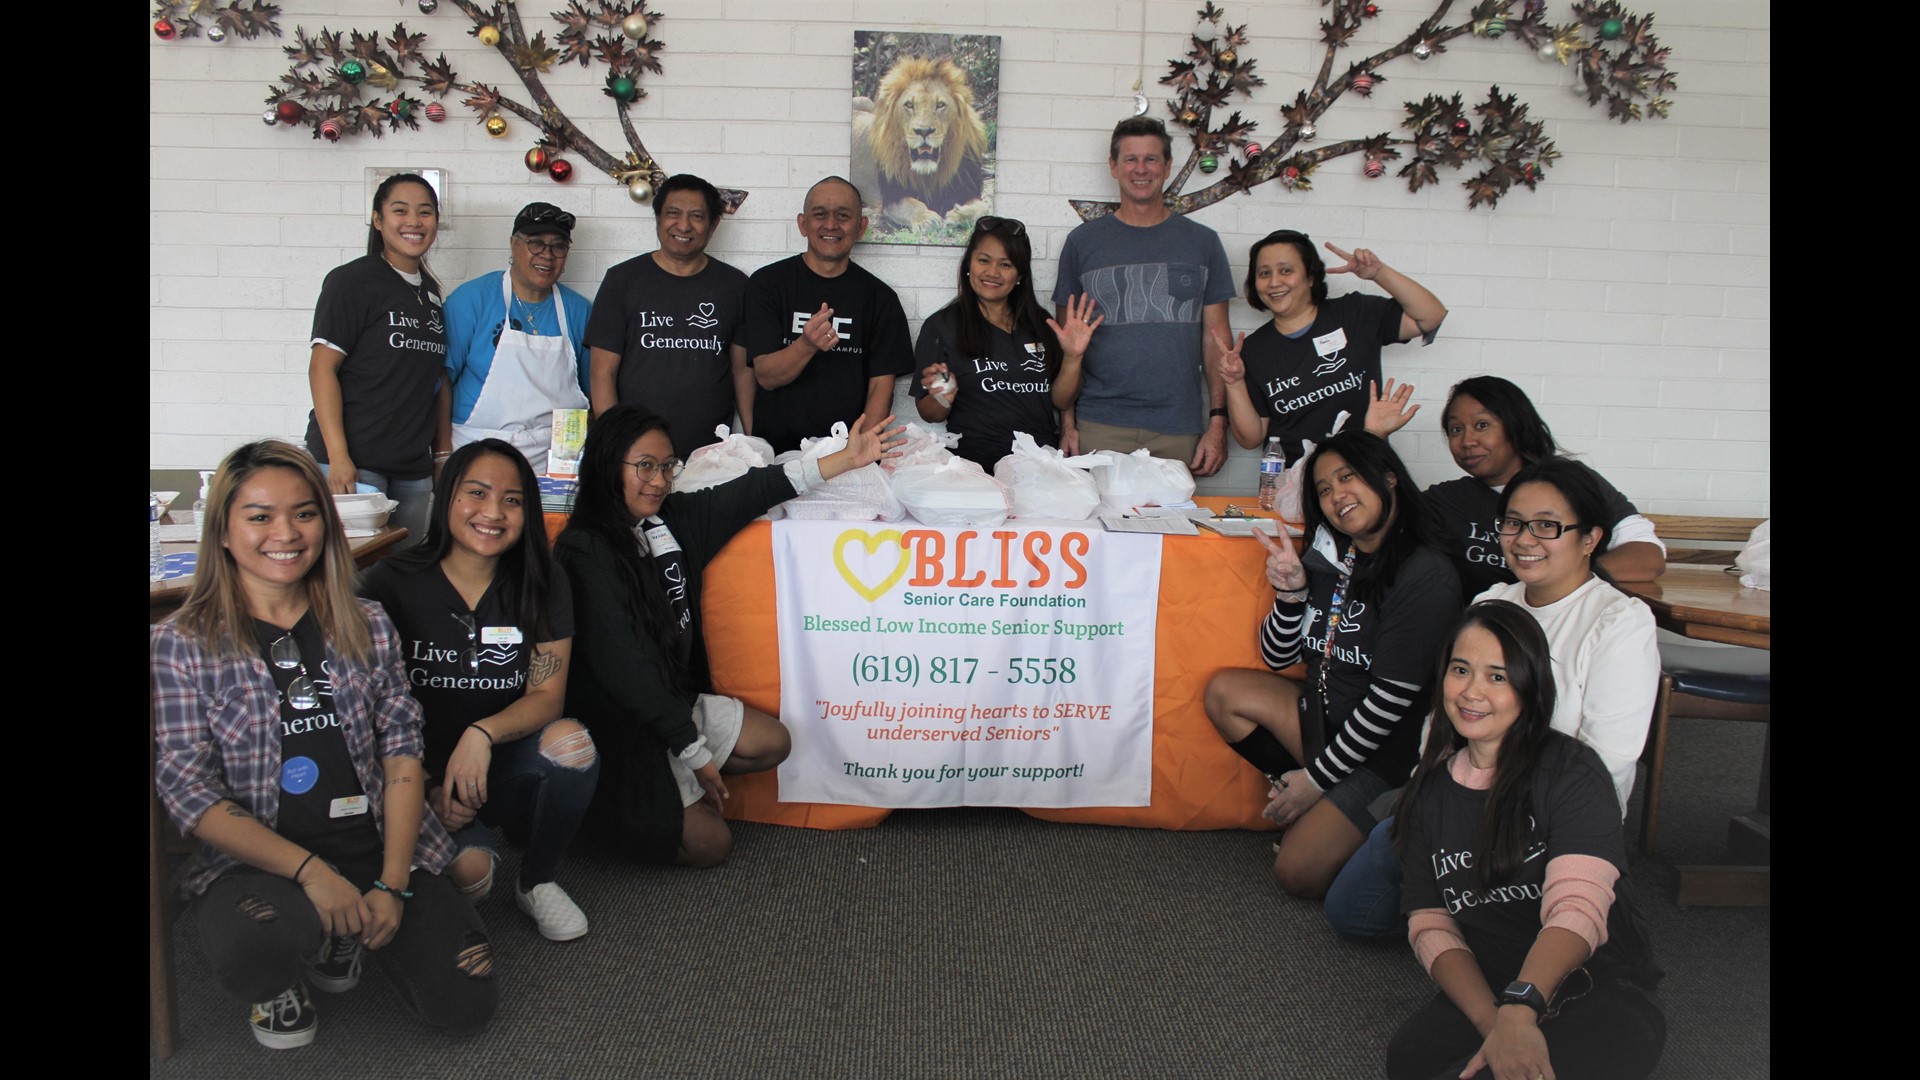 The non-profit organization 'BLISS' provides free home care to seniors on a fixed income.